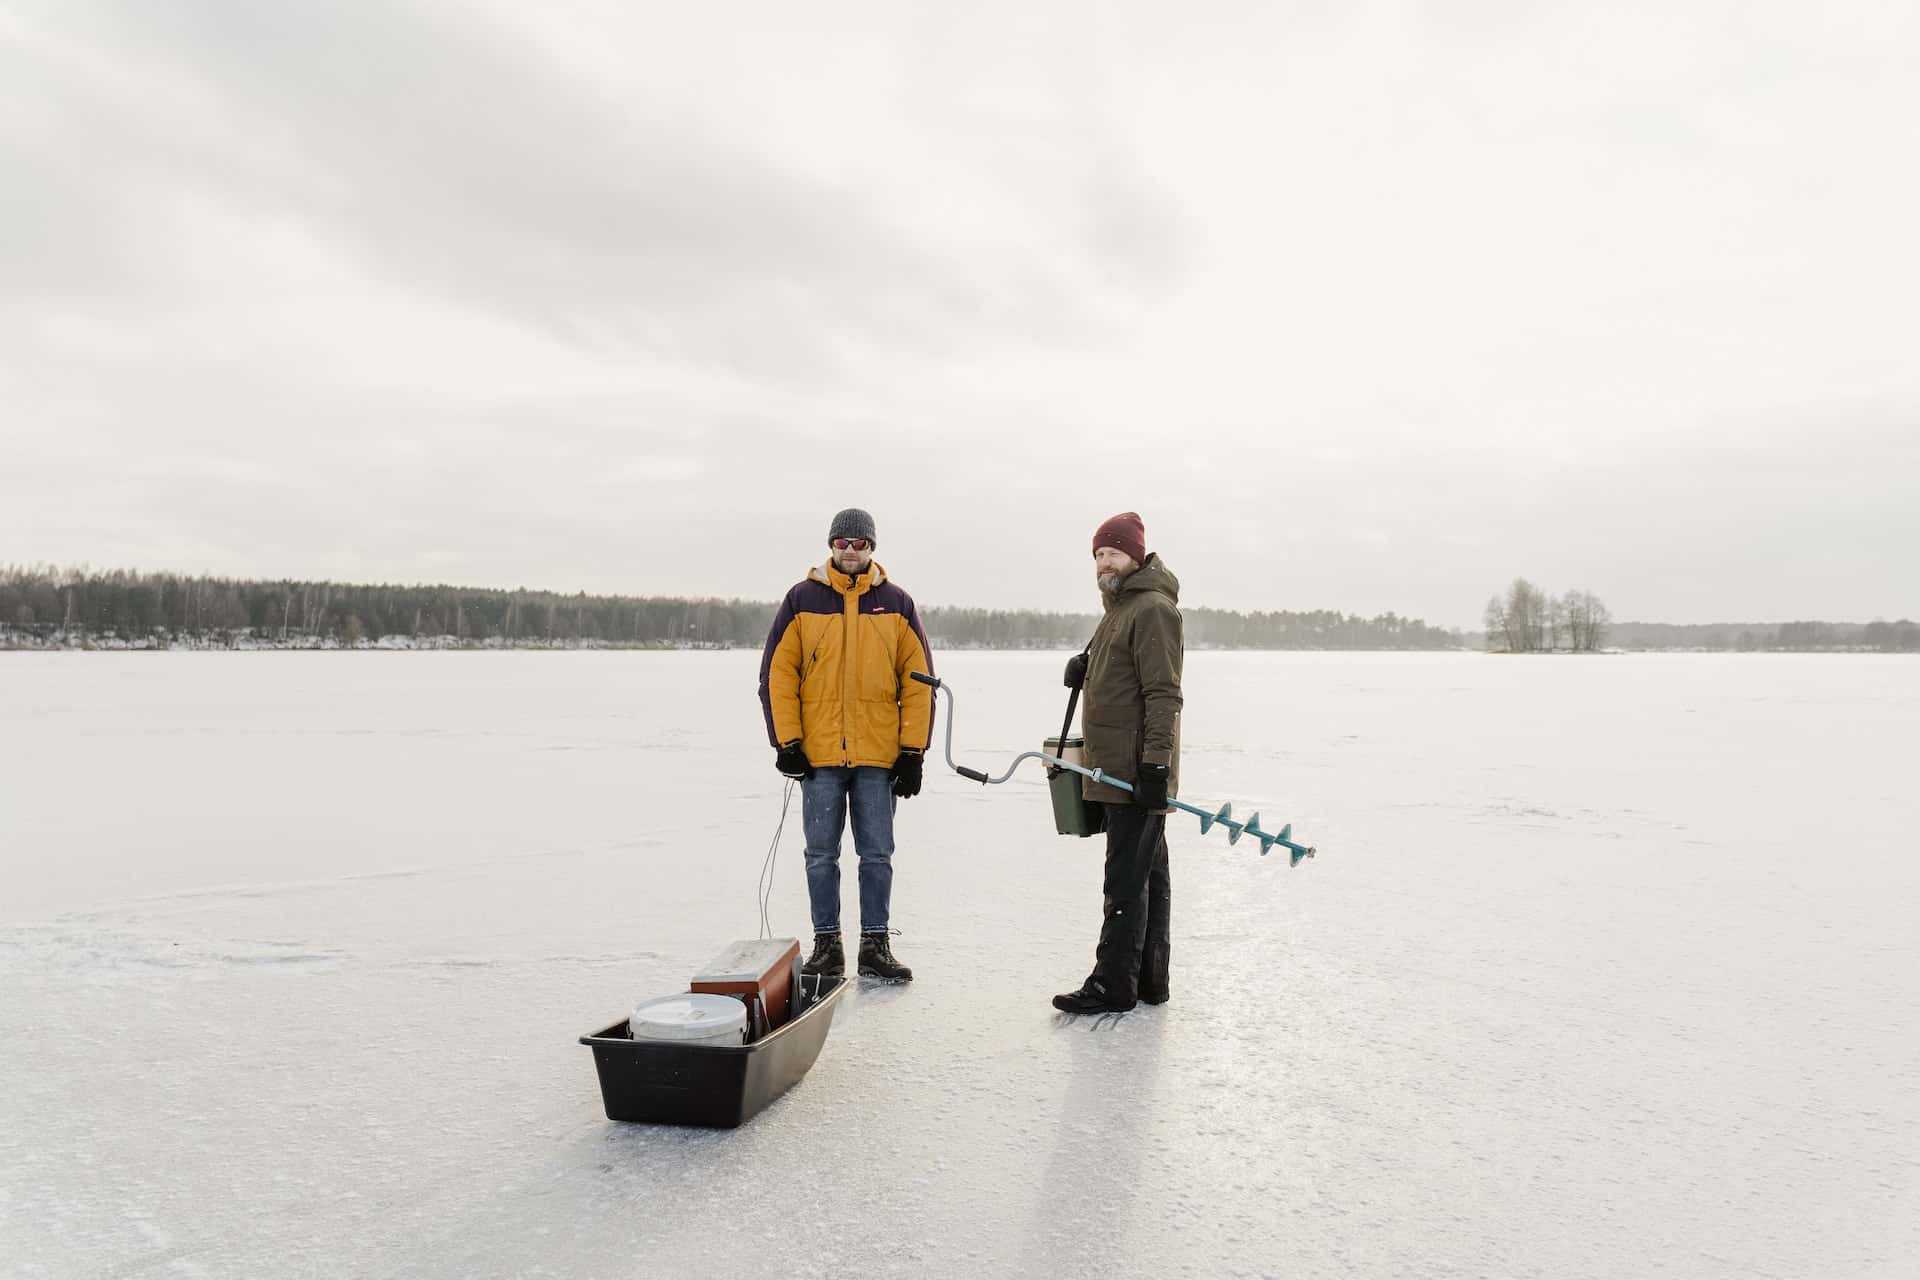 Ice Fishing Safety Tips